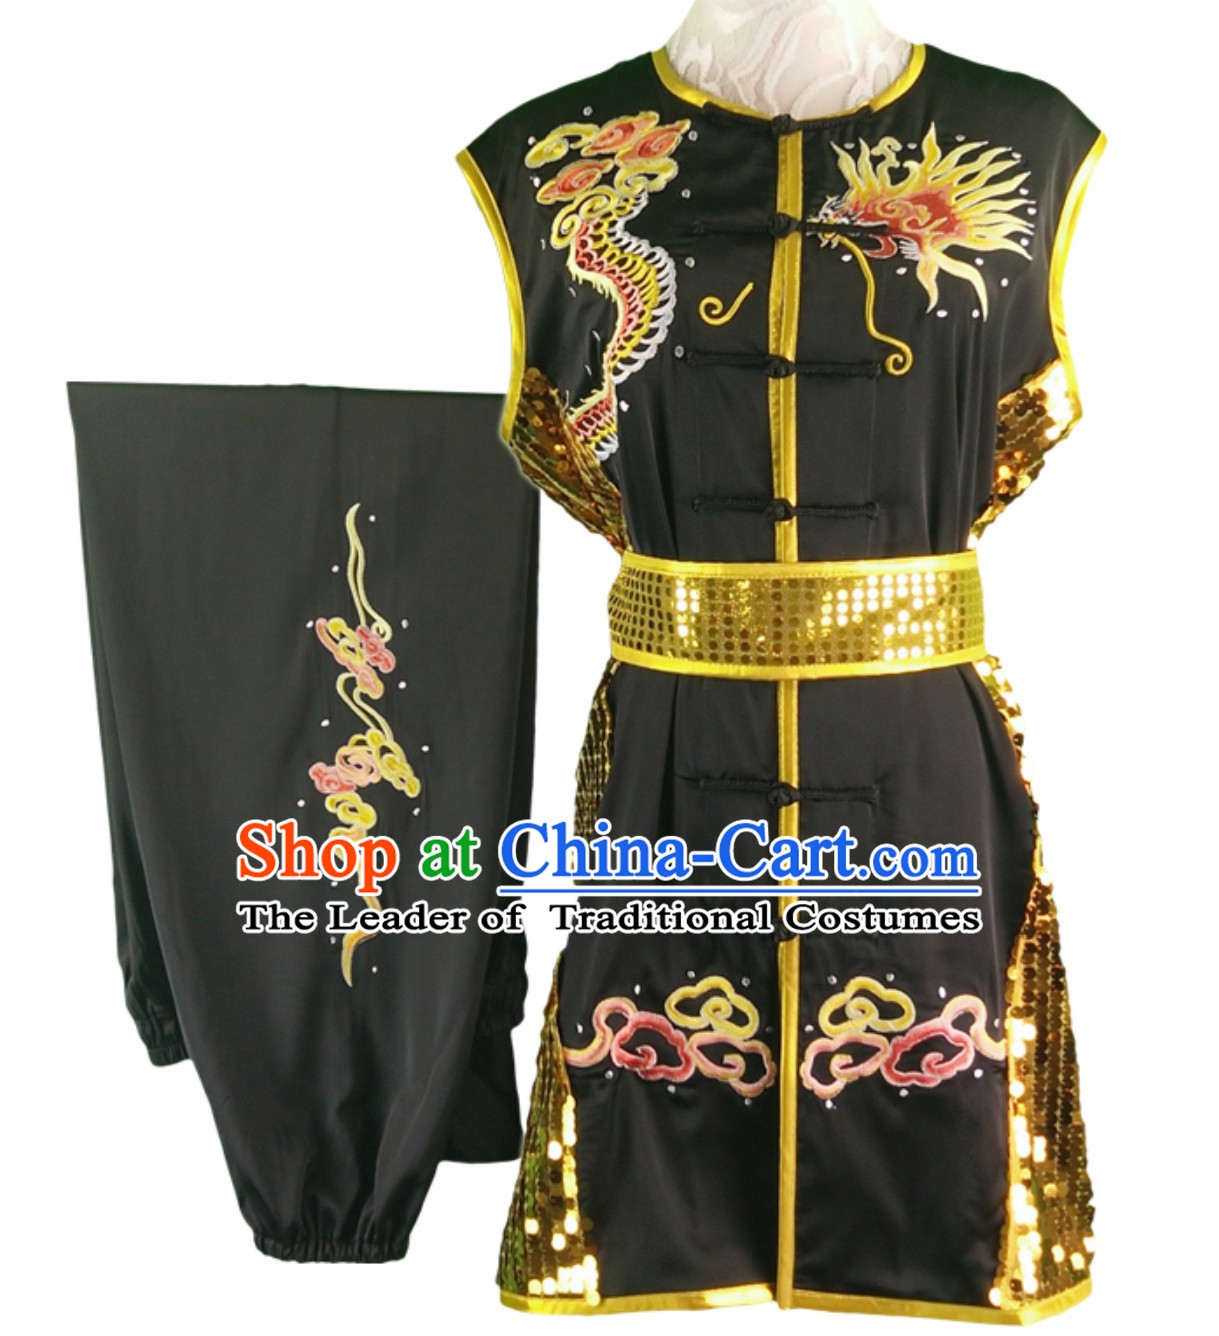 Made to Order Top Nanquan Southern Fist Sleeveless Best and the Most Professional Kung Fu Competition Clothes Contest Suits